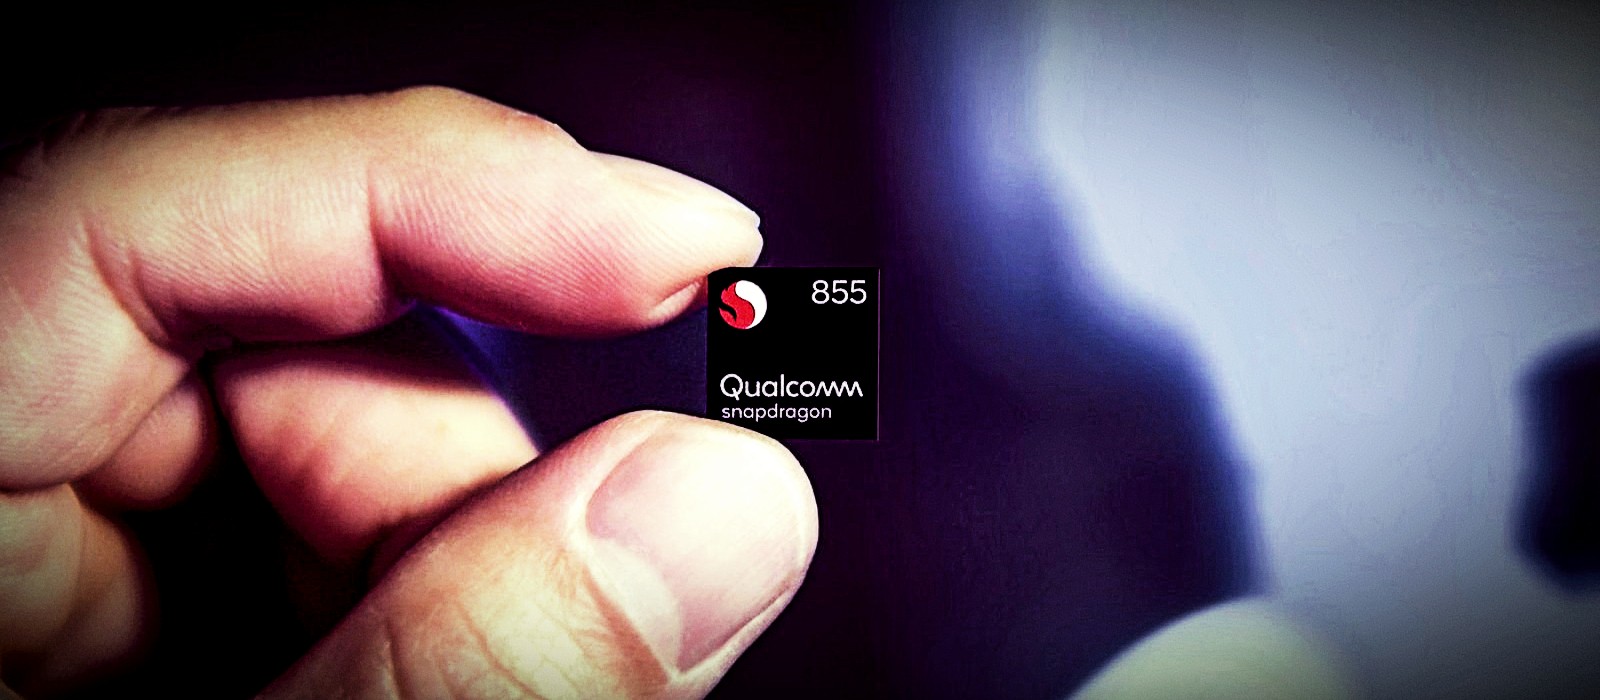 Nearly 50% of all smartphones affected by Qualcomm Snapdragon bugs